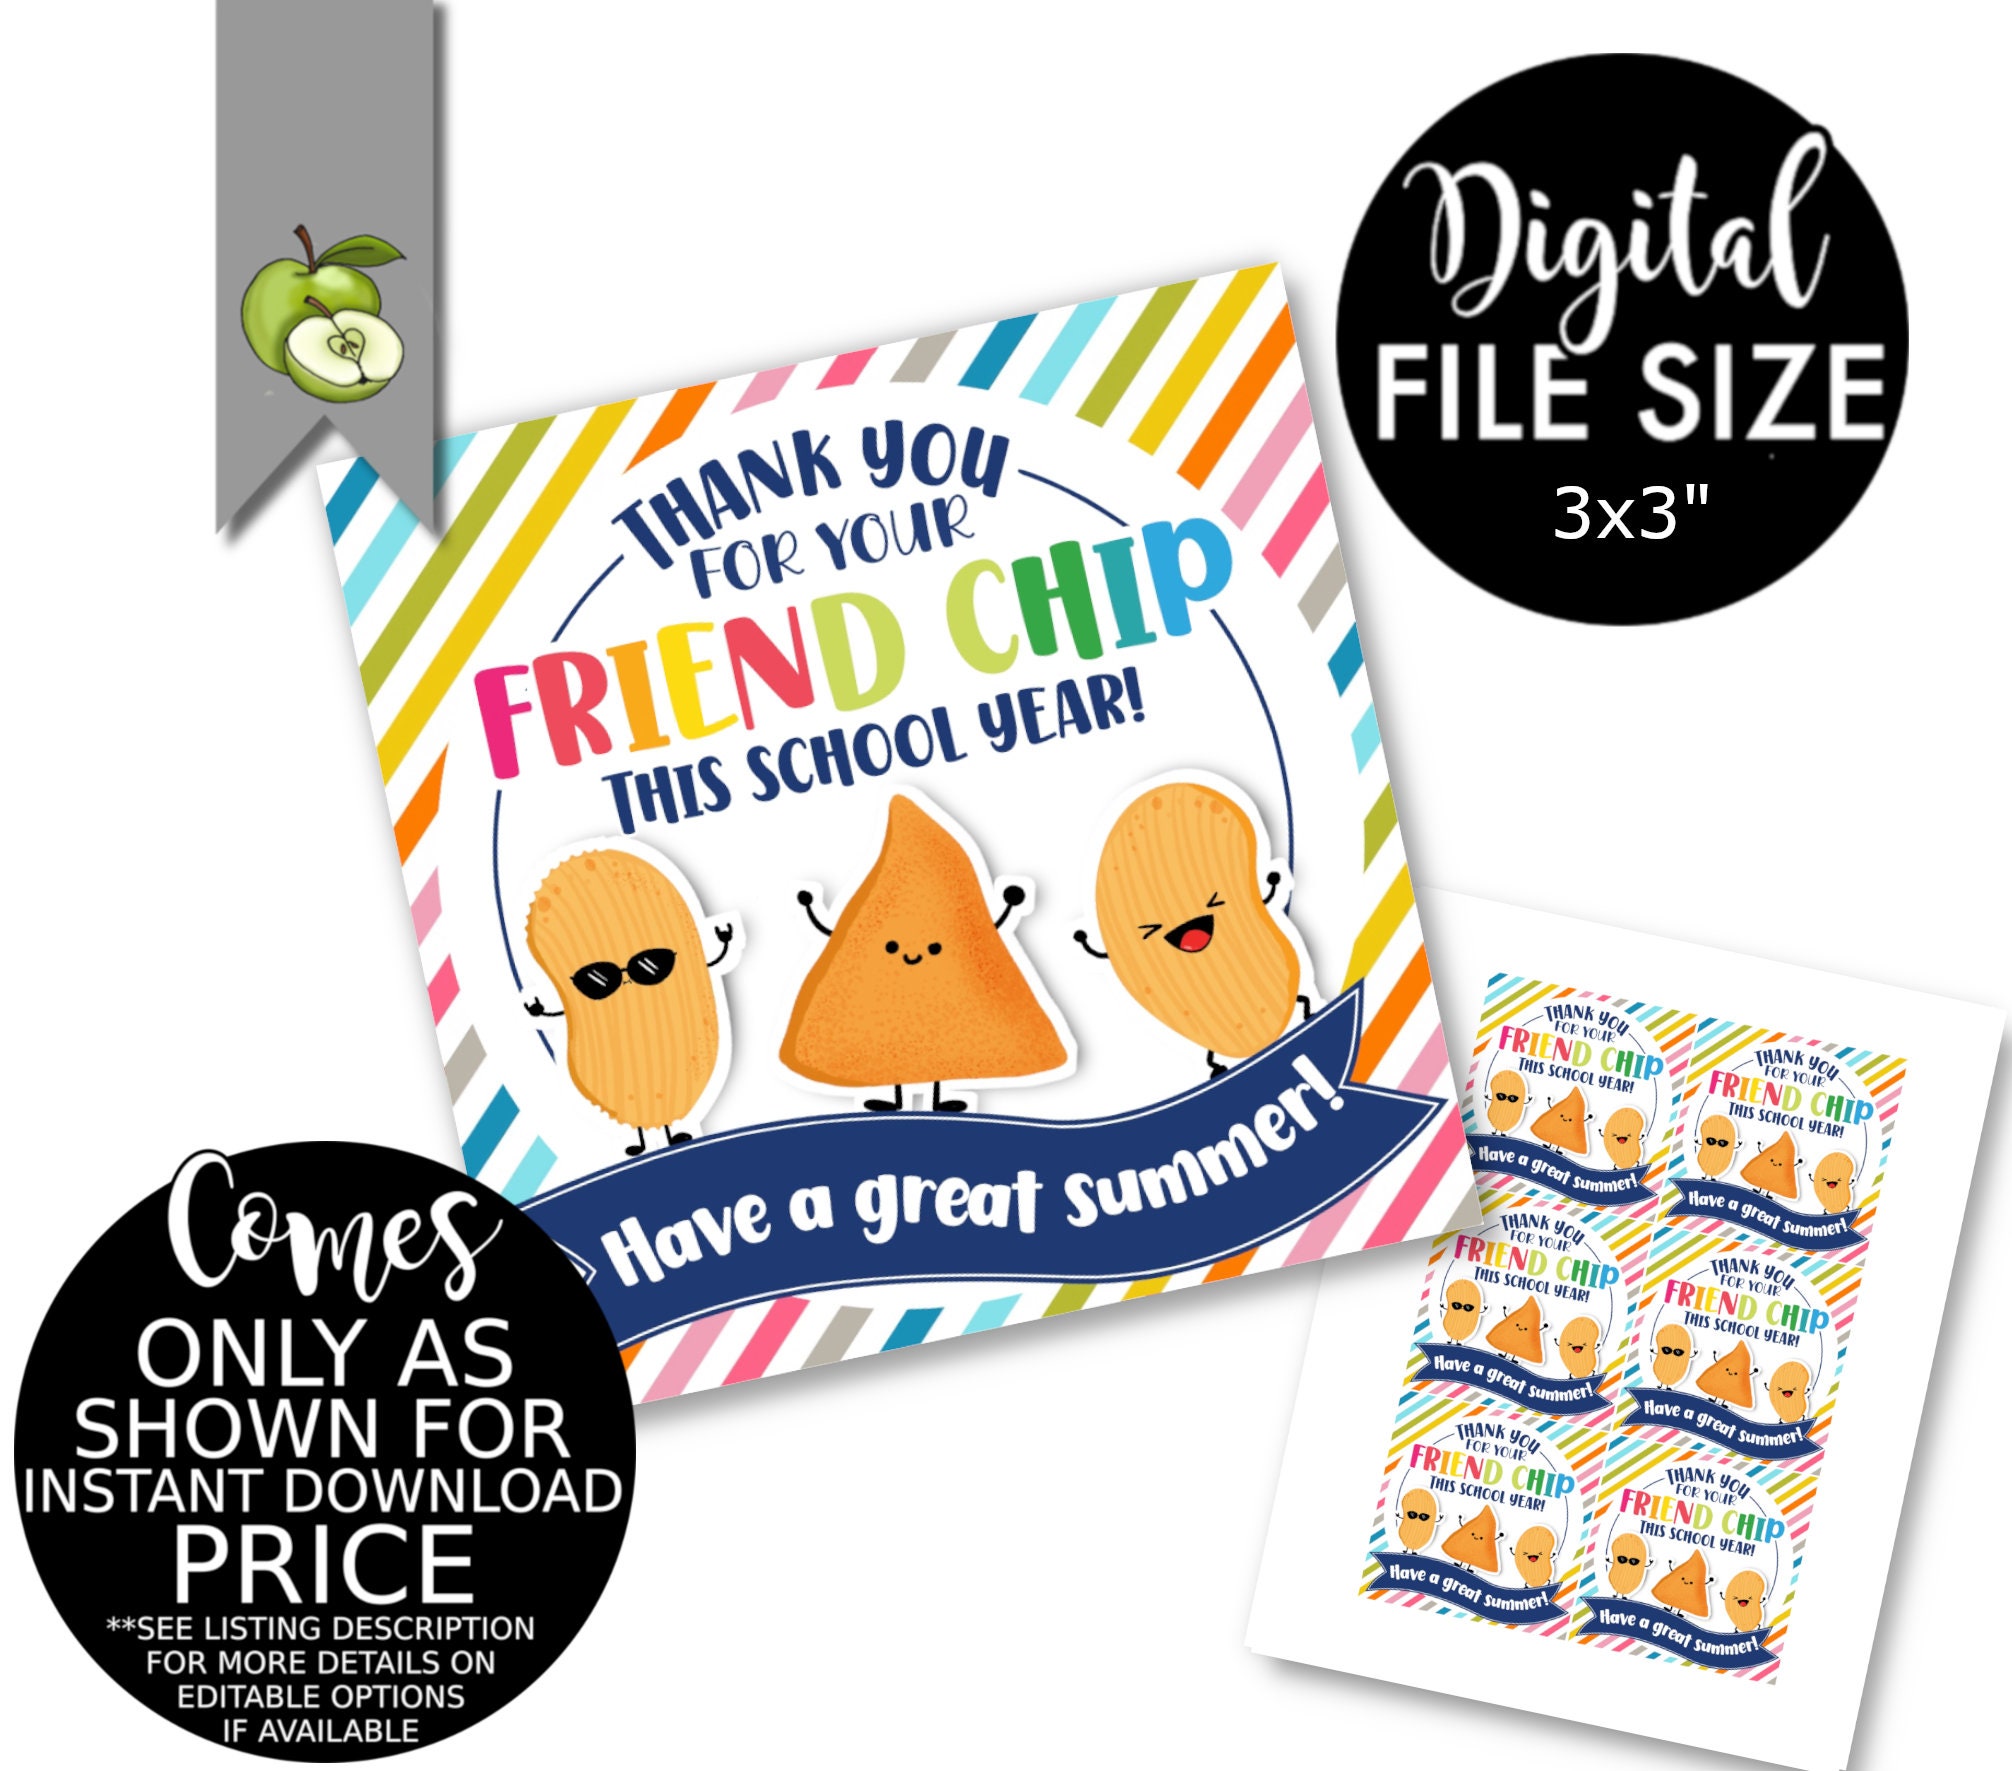 Thank You for Your Friend Chip Have a Great Summer Printable